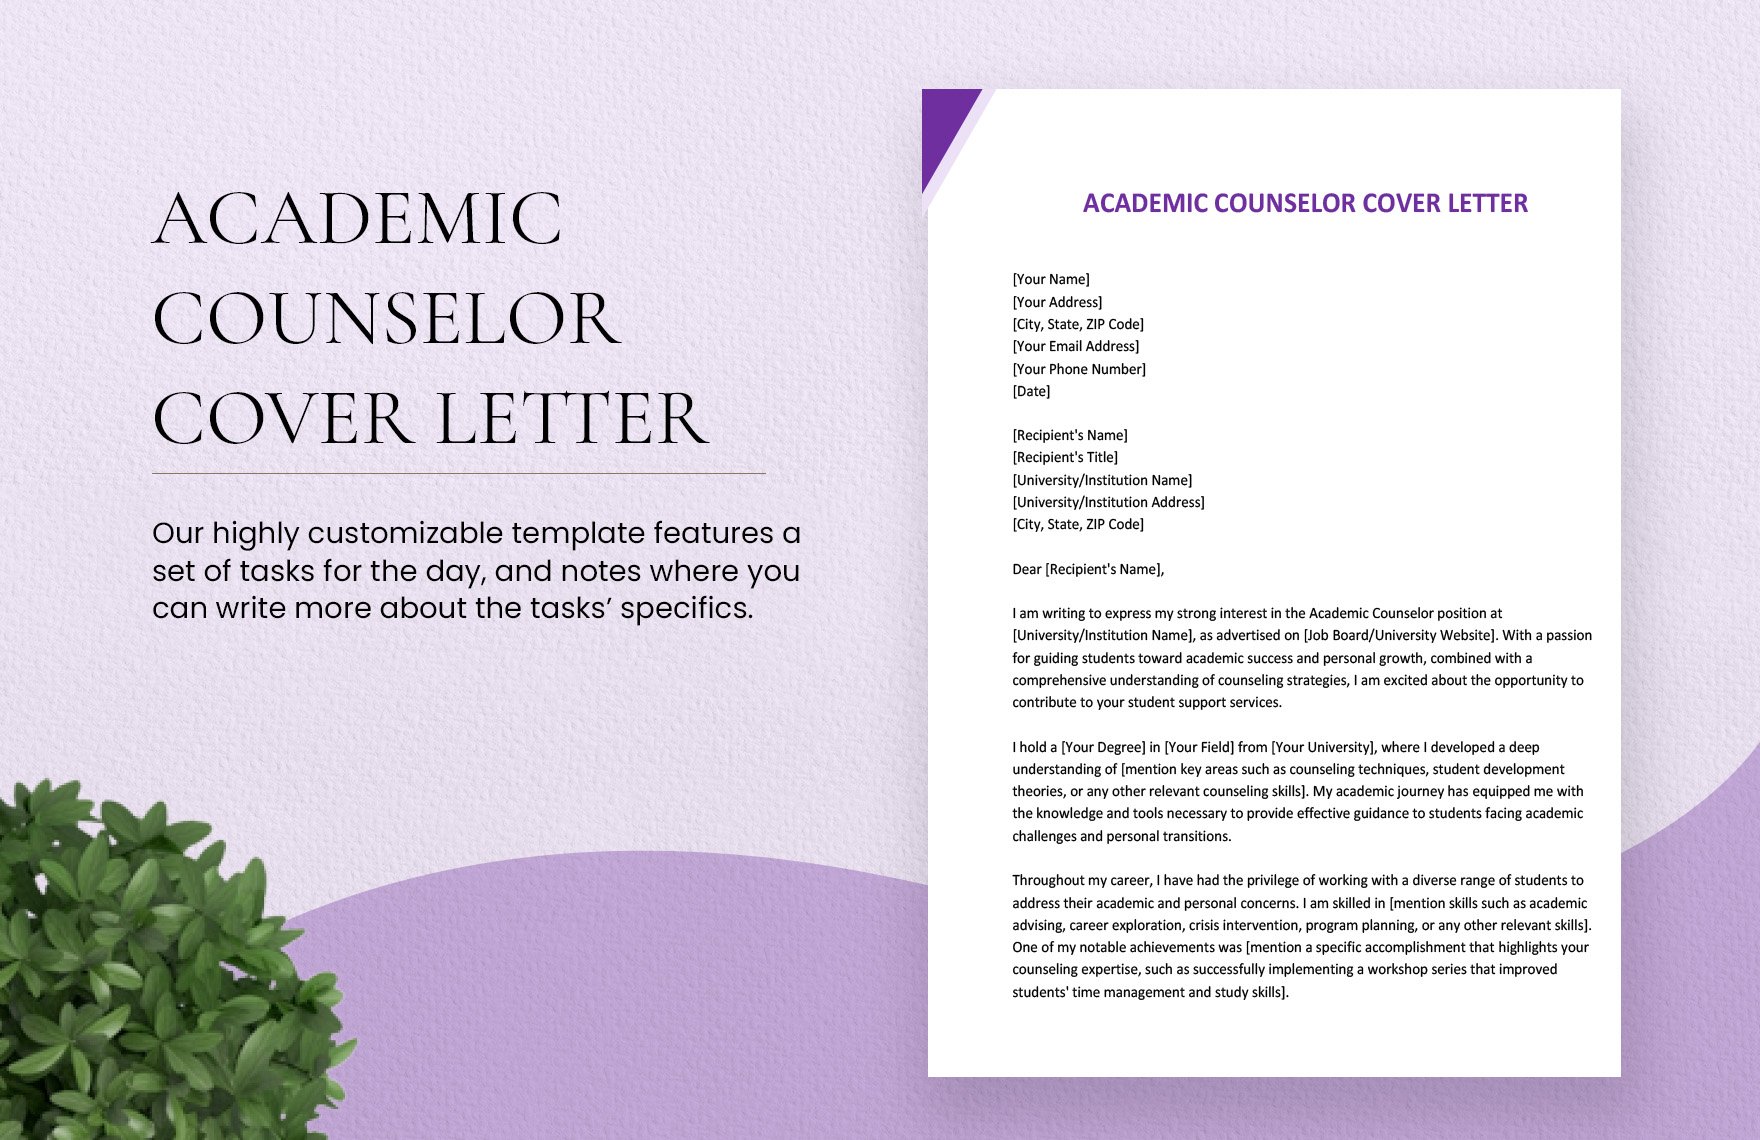 Academic Counselor Cover Letter in Word, Google Docs